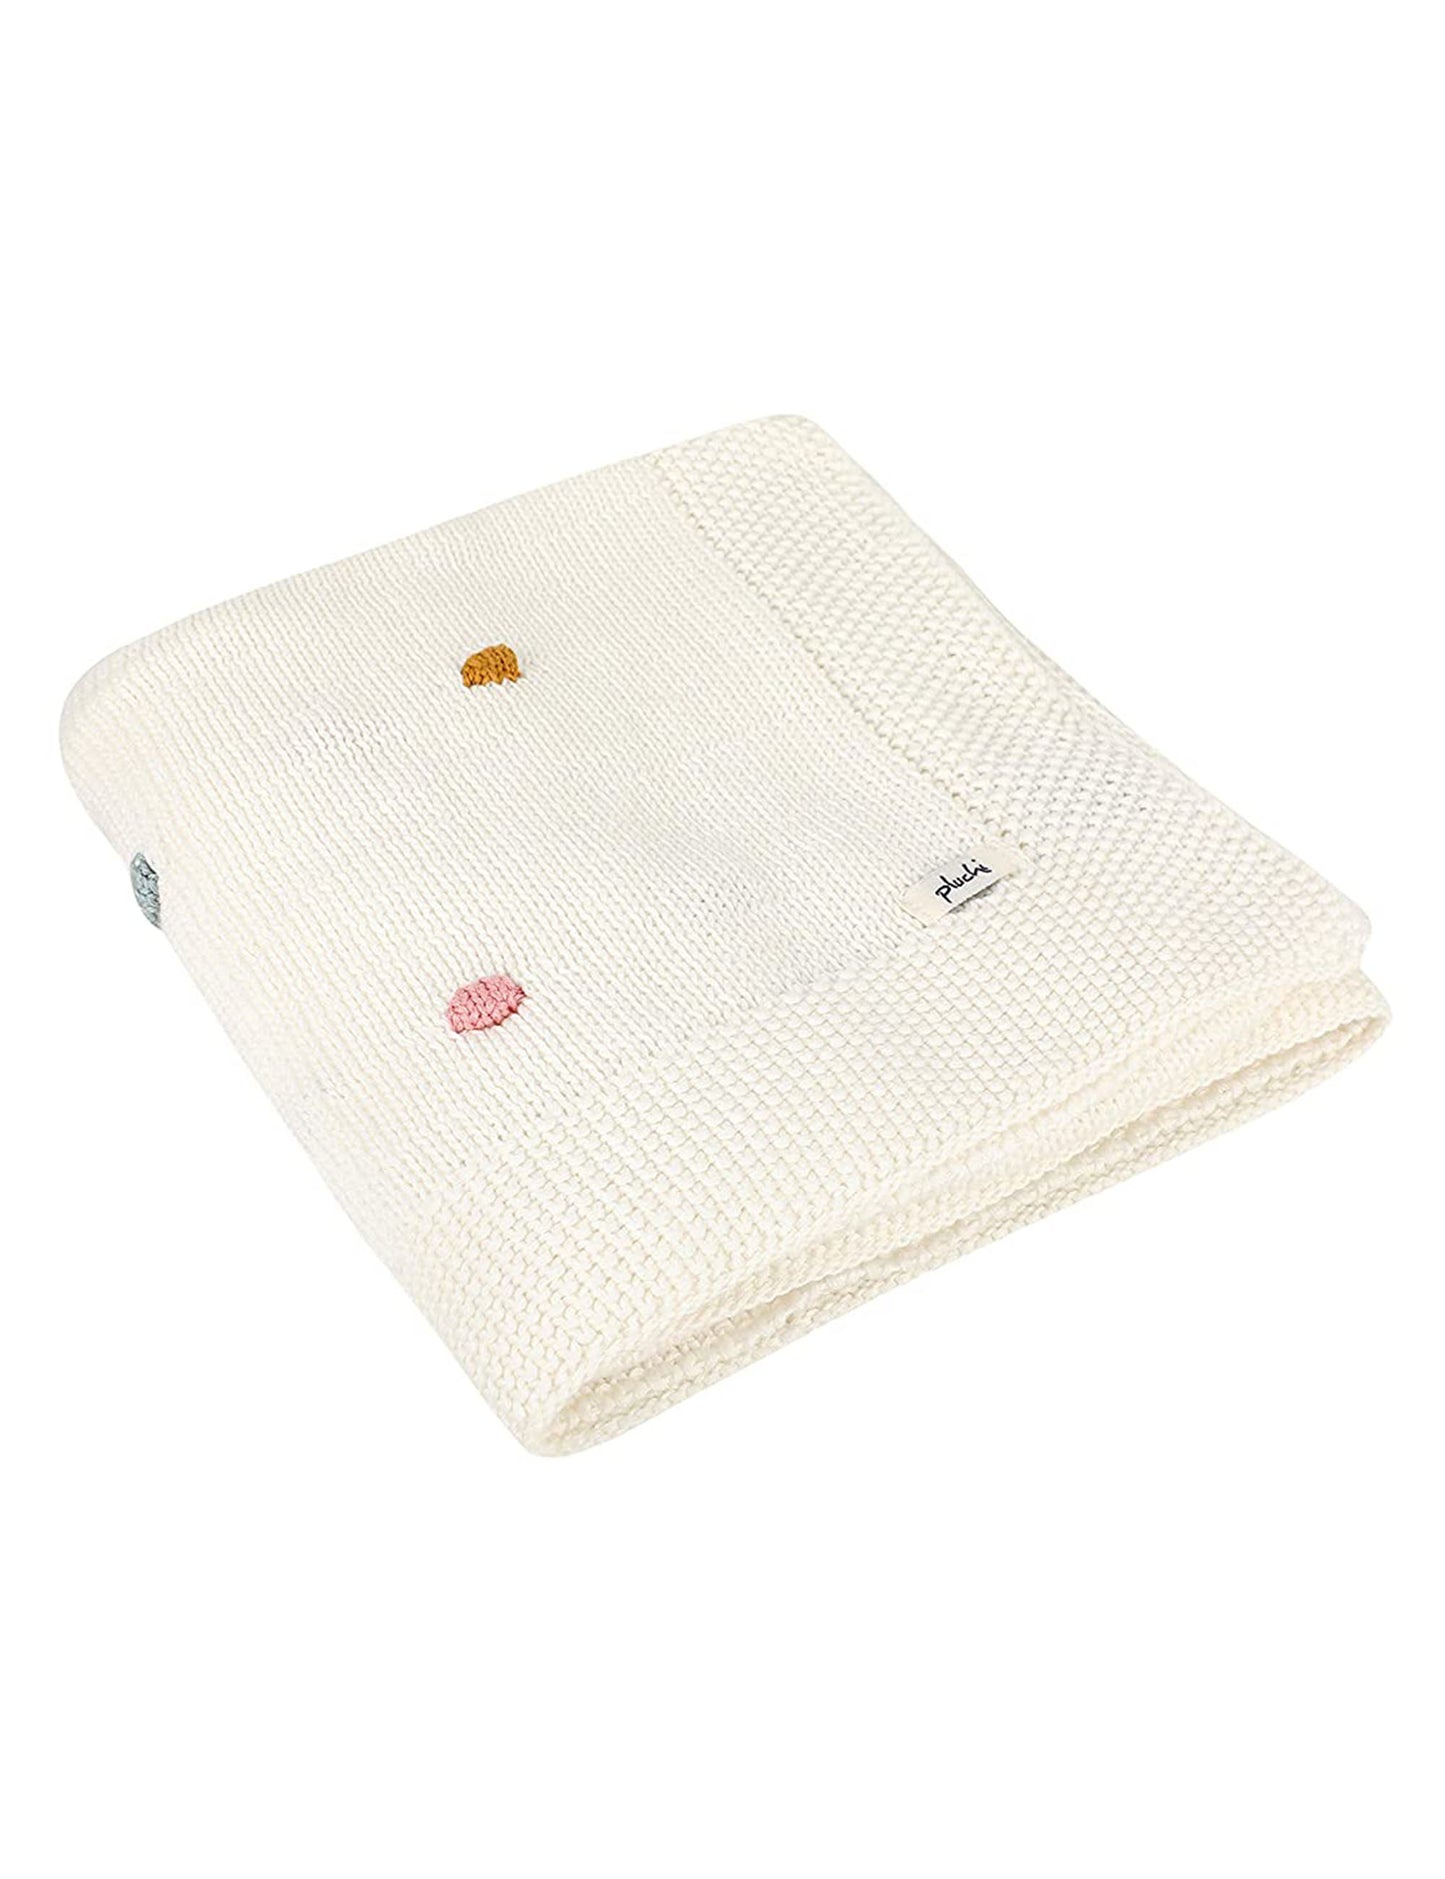 Snuggly Bubbles Organic Cotton Knitted Baby Blanket